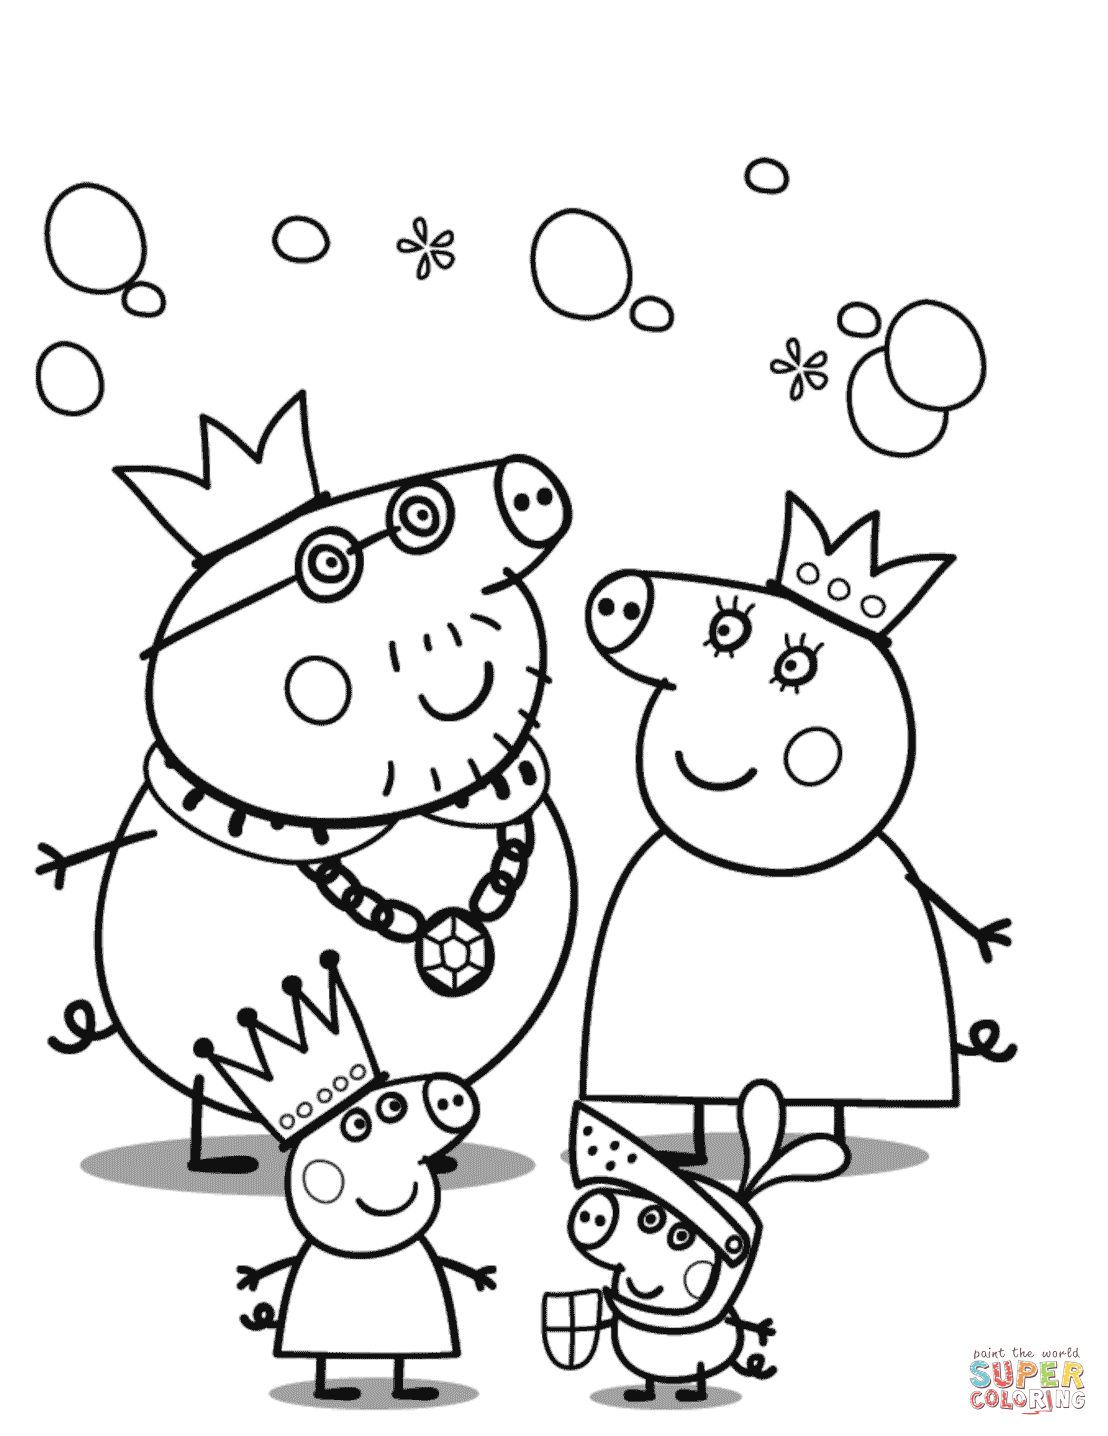 Peppa pigs royal family coloring page free printable coloring pages